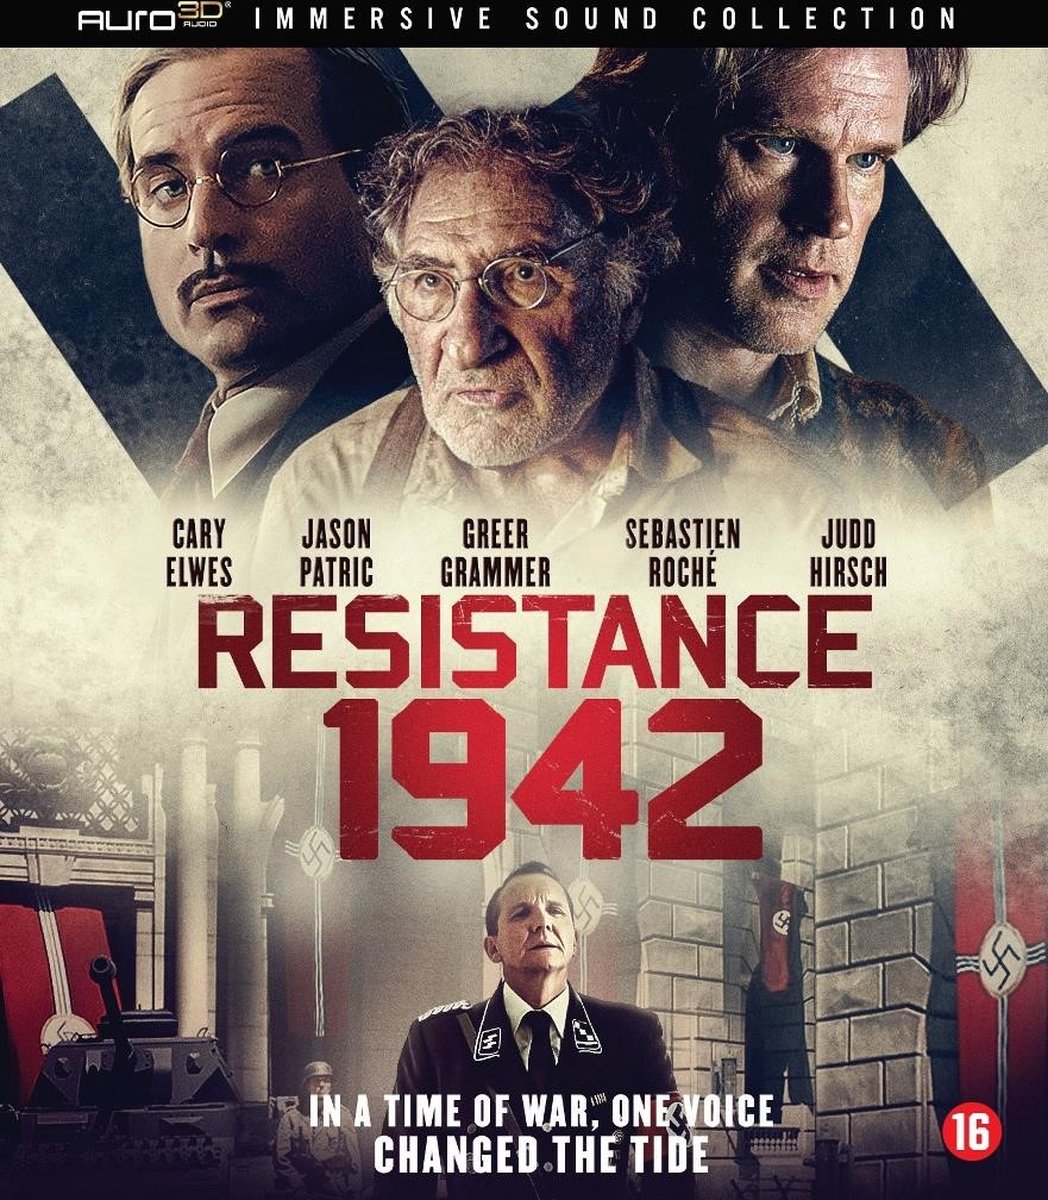 Resistance 1942 (Blu-ray) + extra's